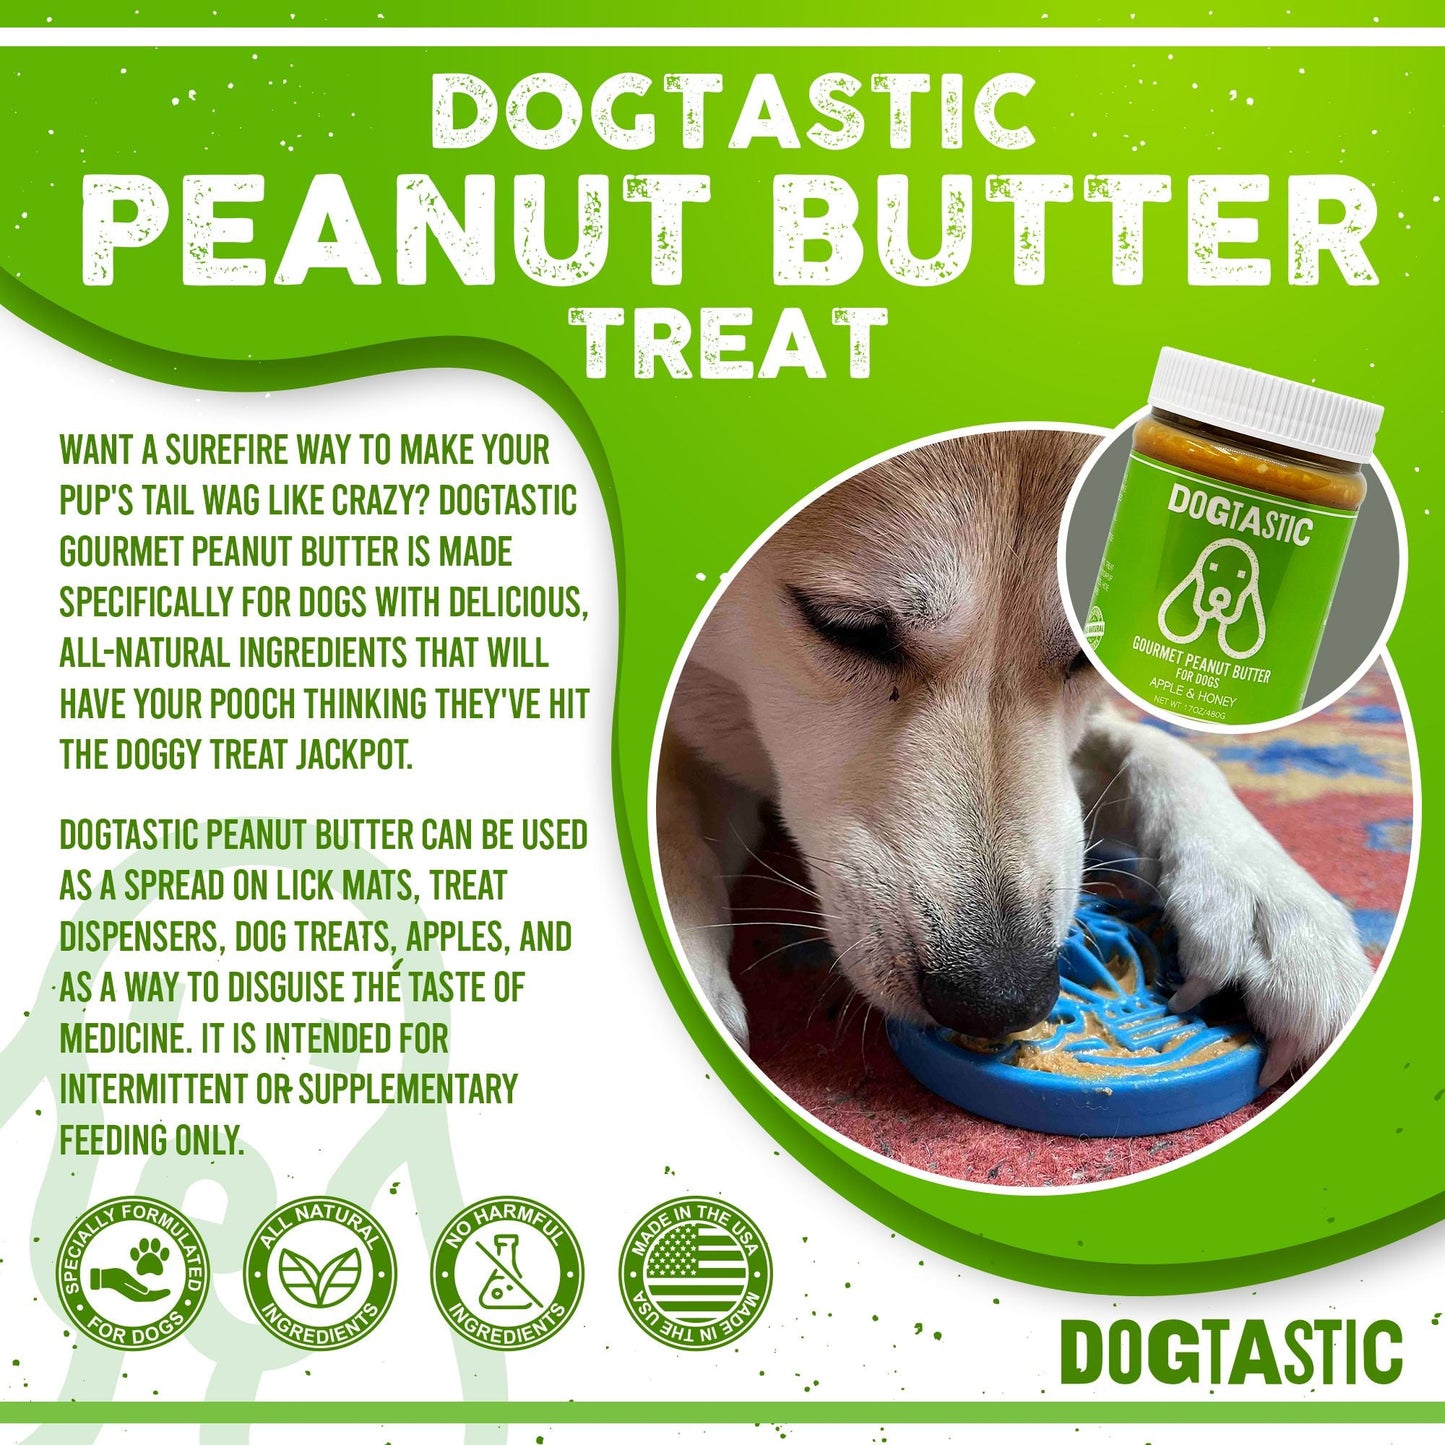 DOGTASTIC Gourmet Peanut Butter for dogs - BERRIES & HONEY FLAVOR T&T